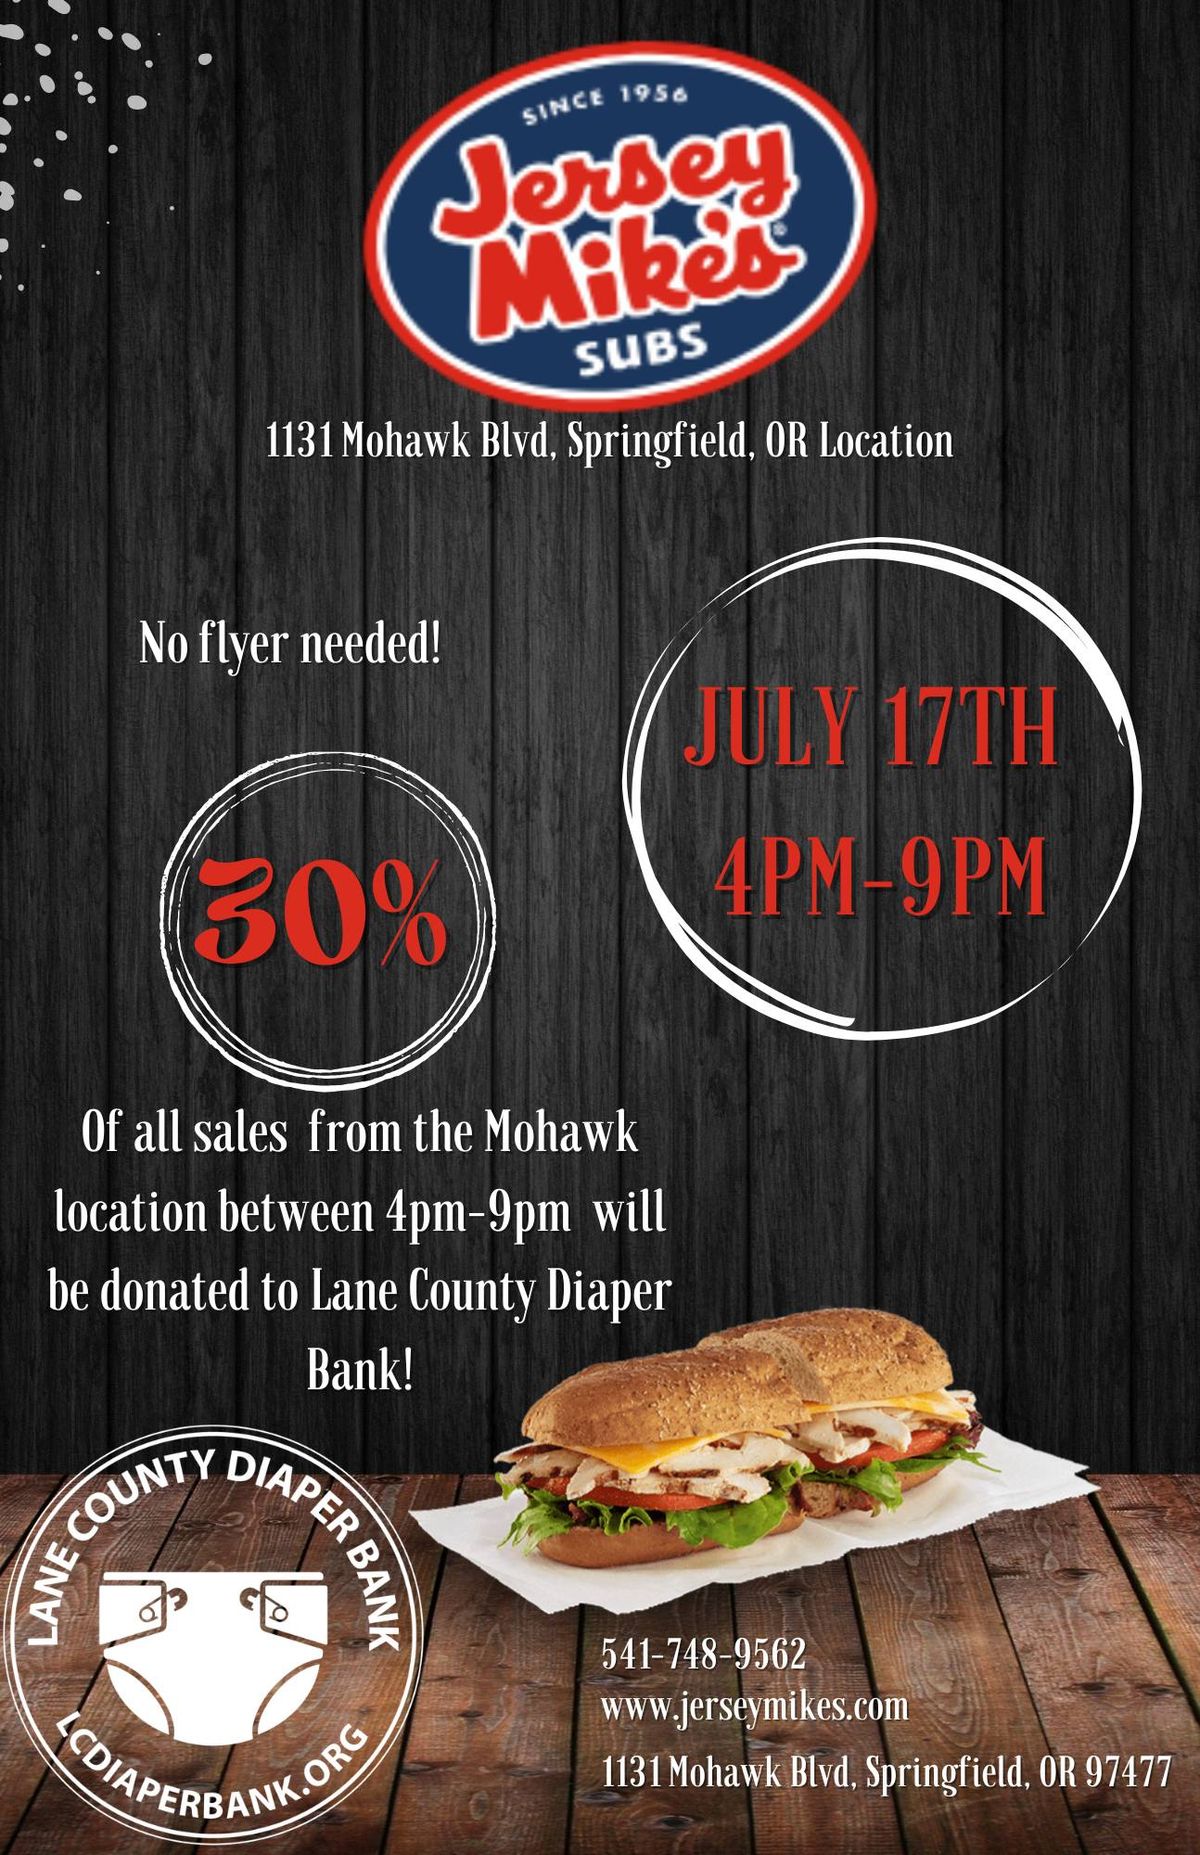 Jersey Mikes Fundraiser for Lane County Diaper Bank